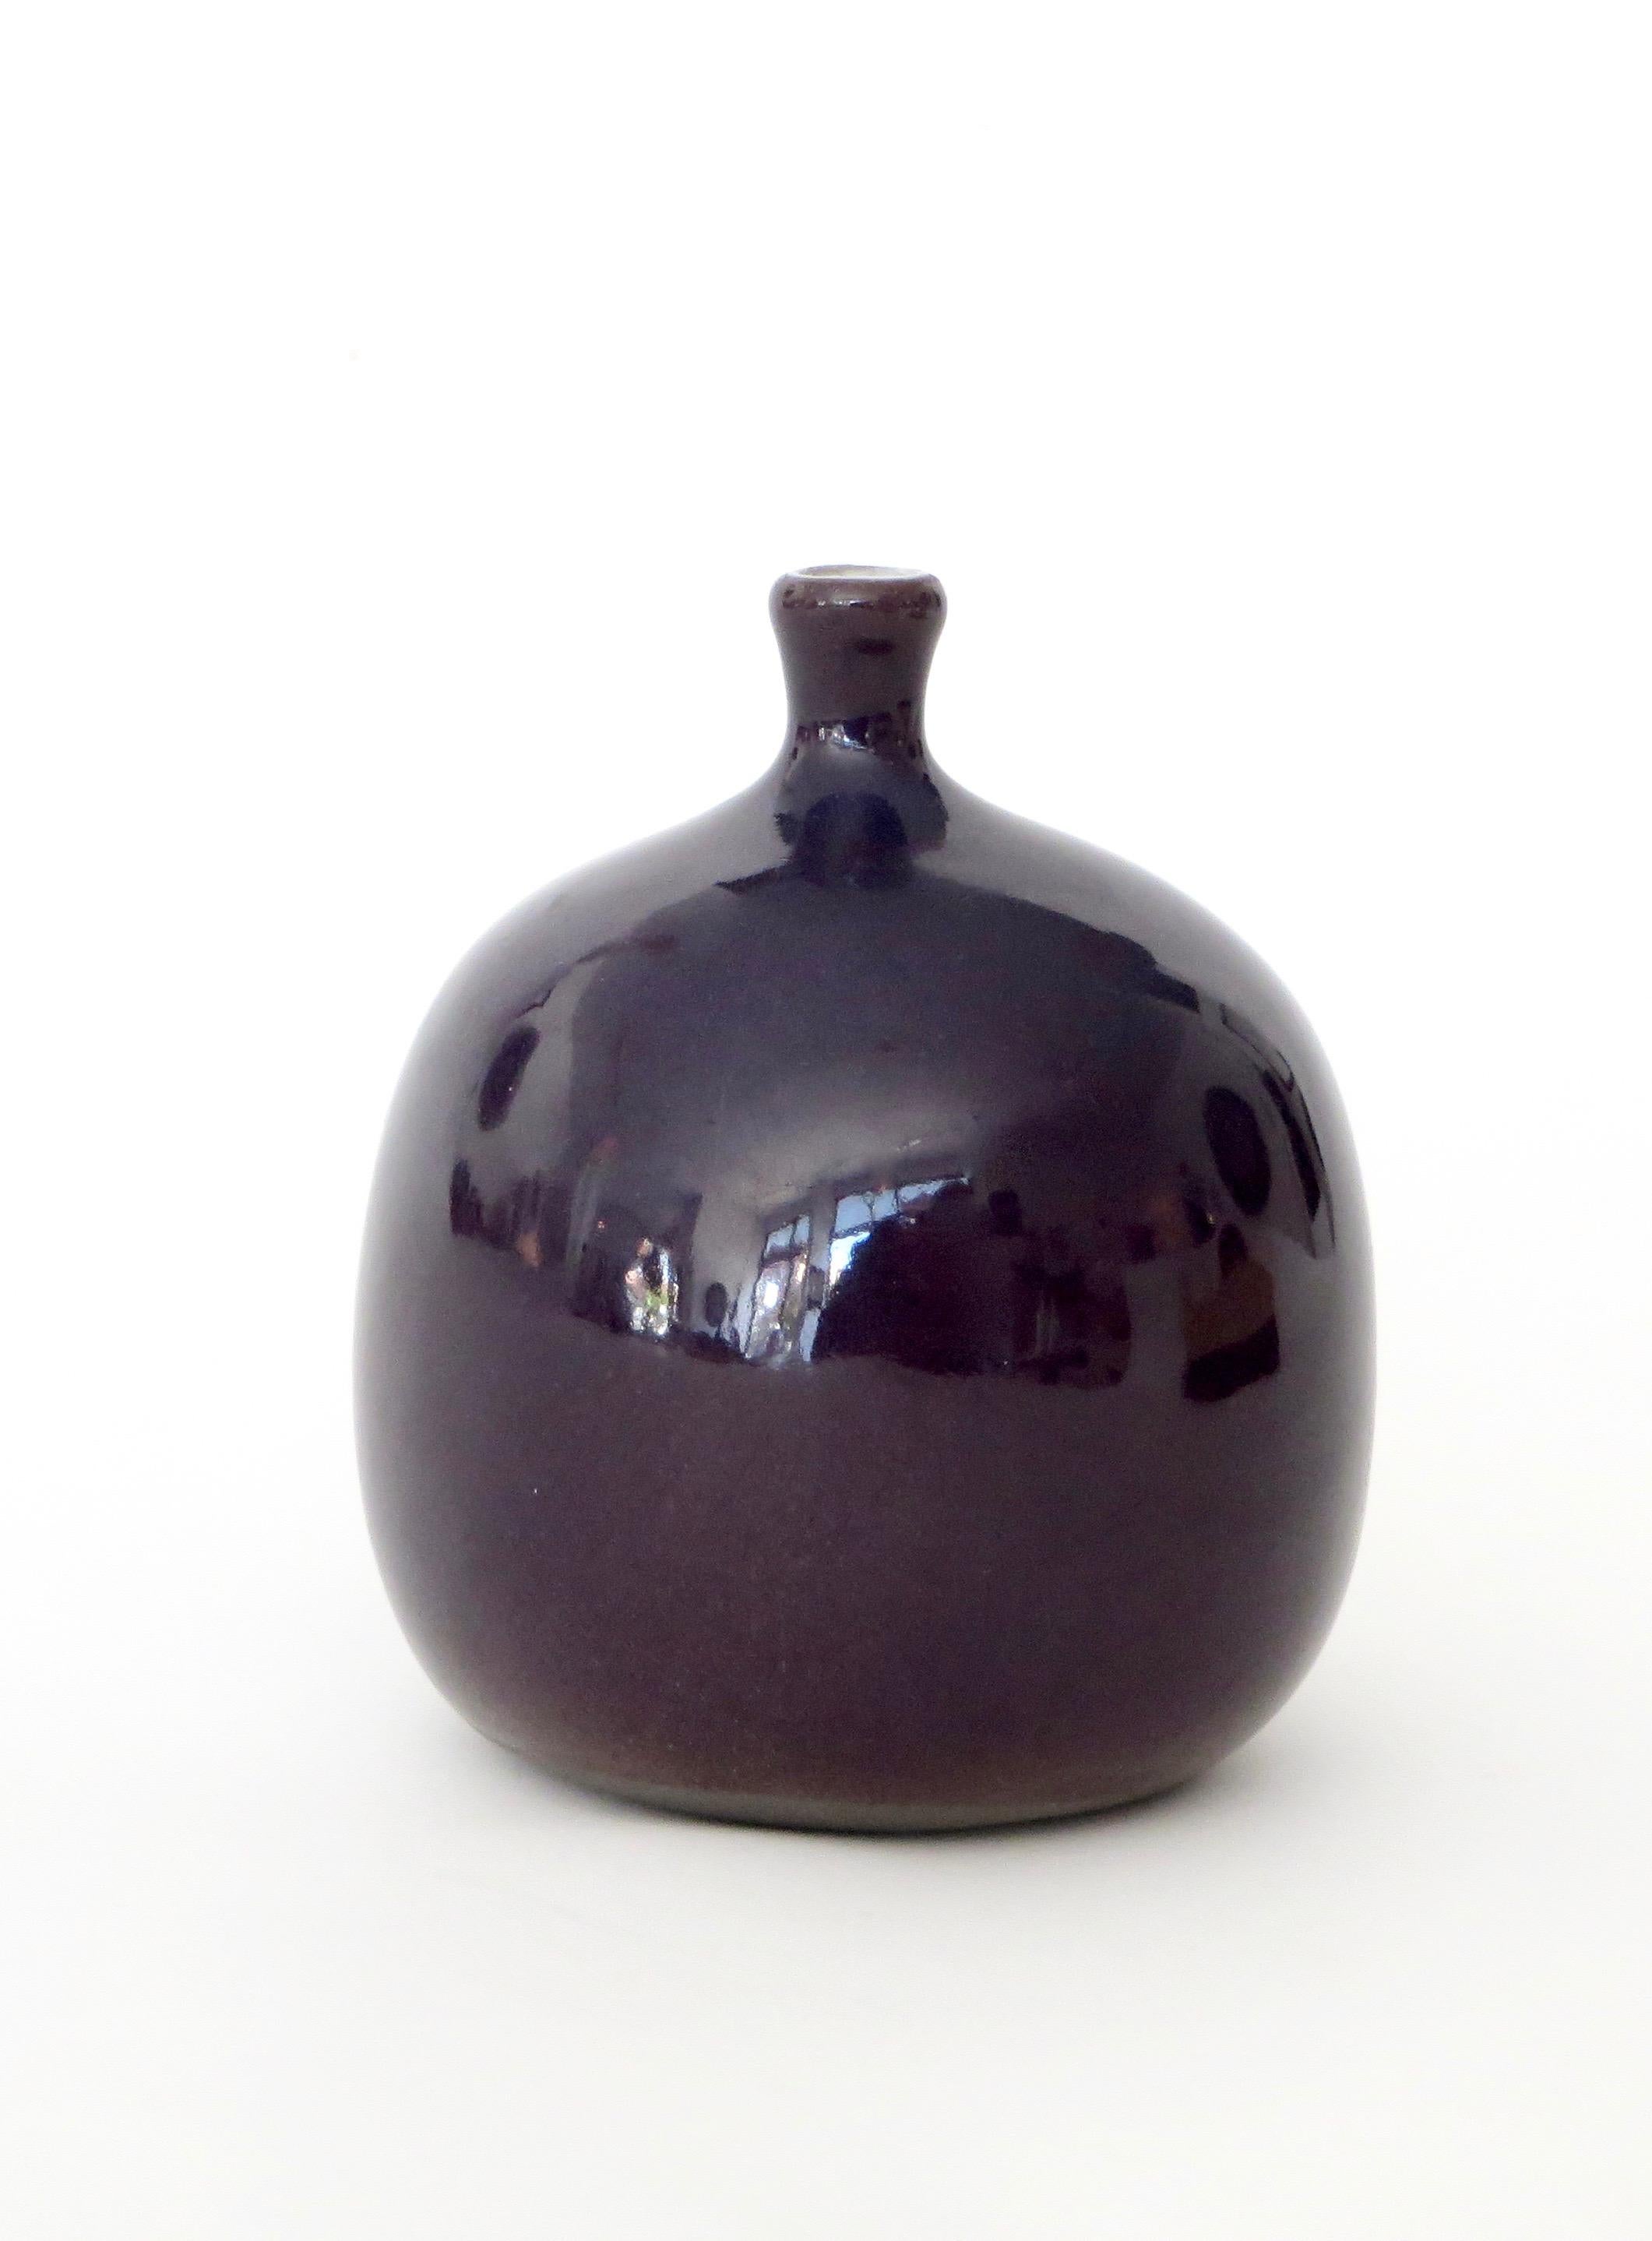 Apple form vase by the French ceramic artists Jacques and Dani Ruelland. Signed. 
Iconic glossy and shiny perfectly applied glaze in dark purple aubergine. 